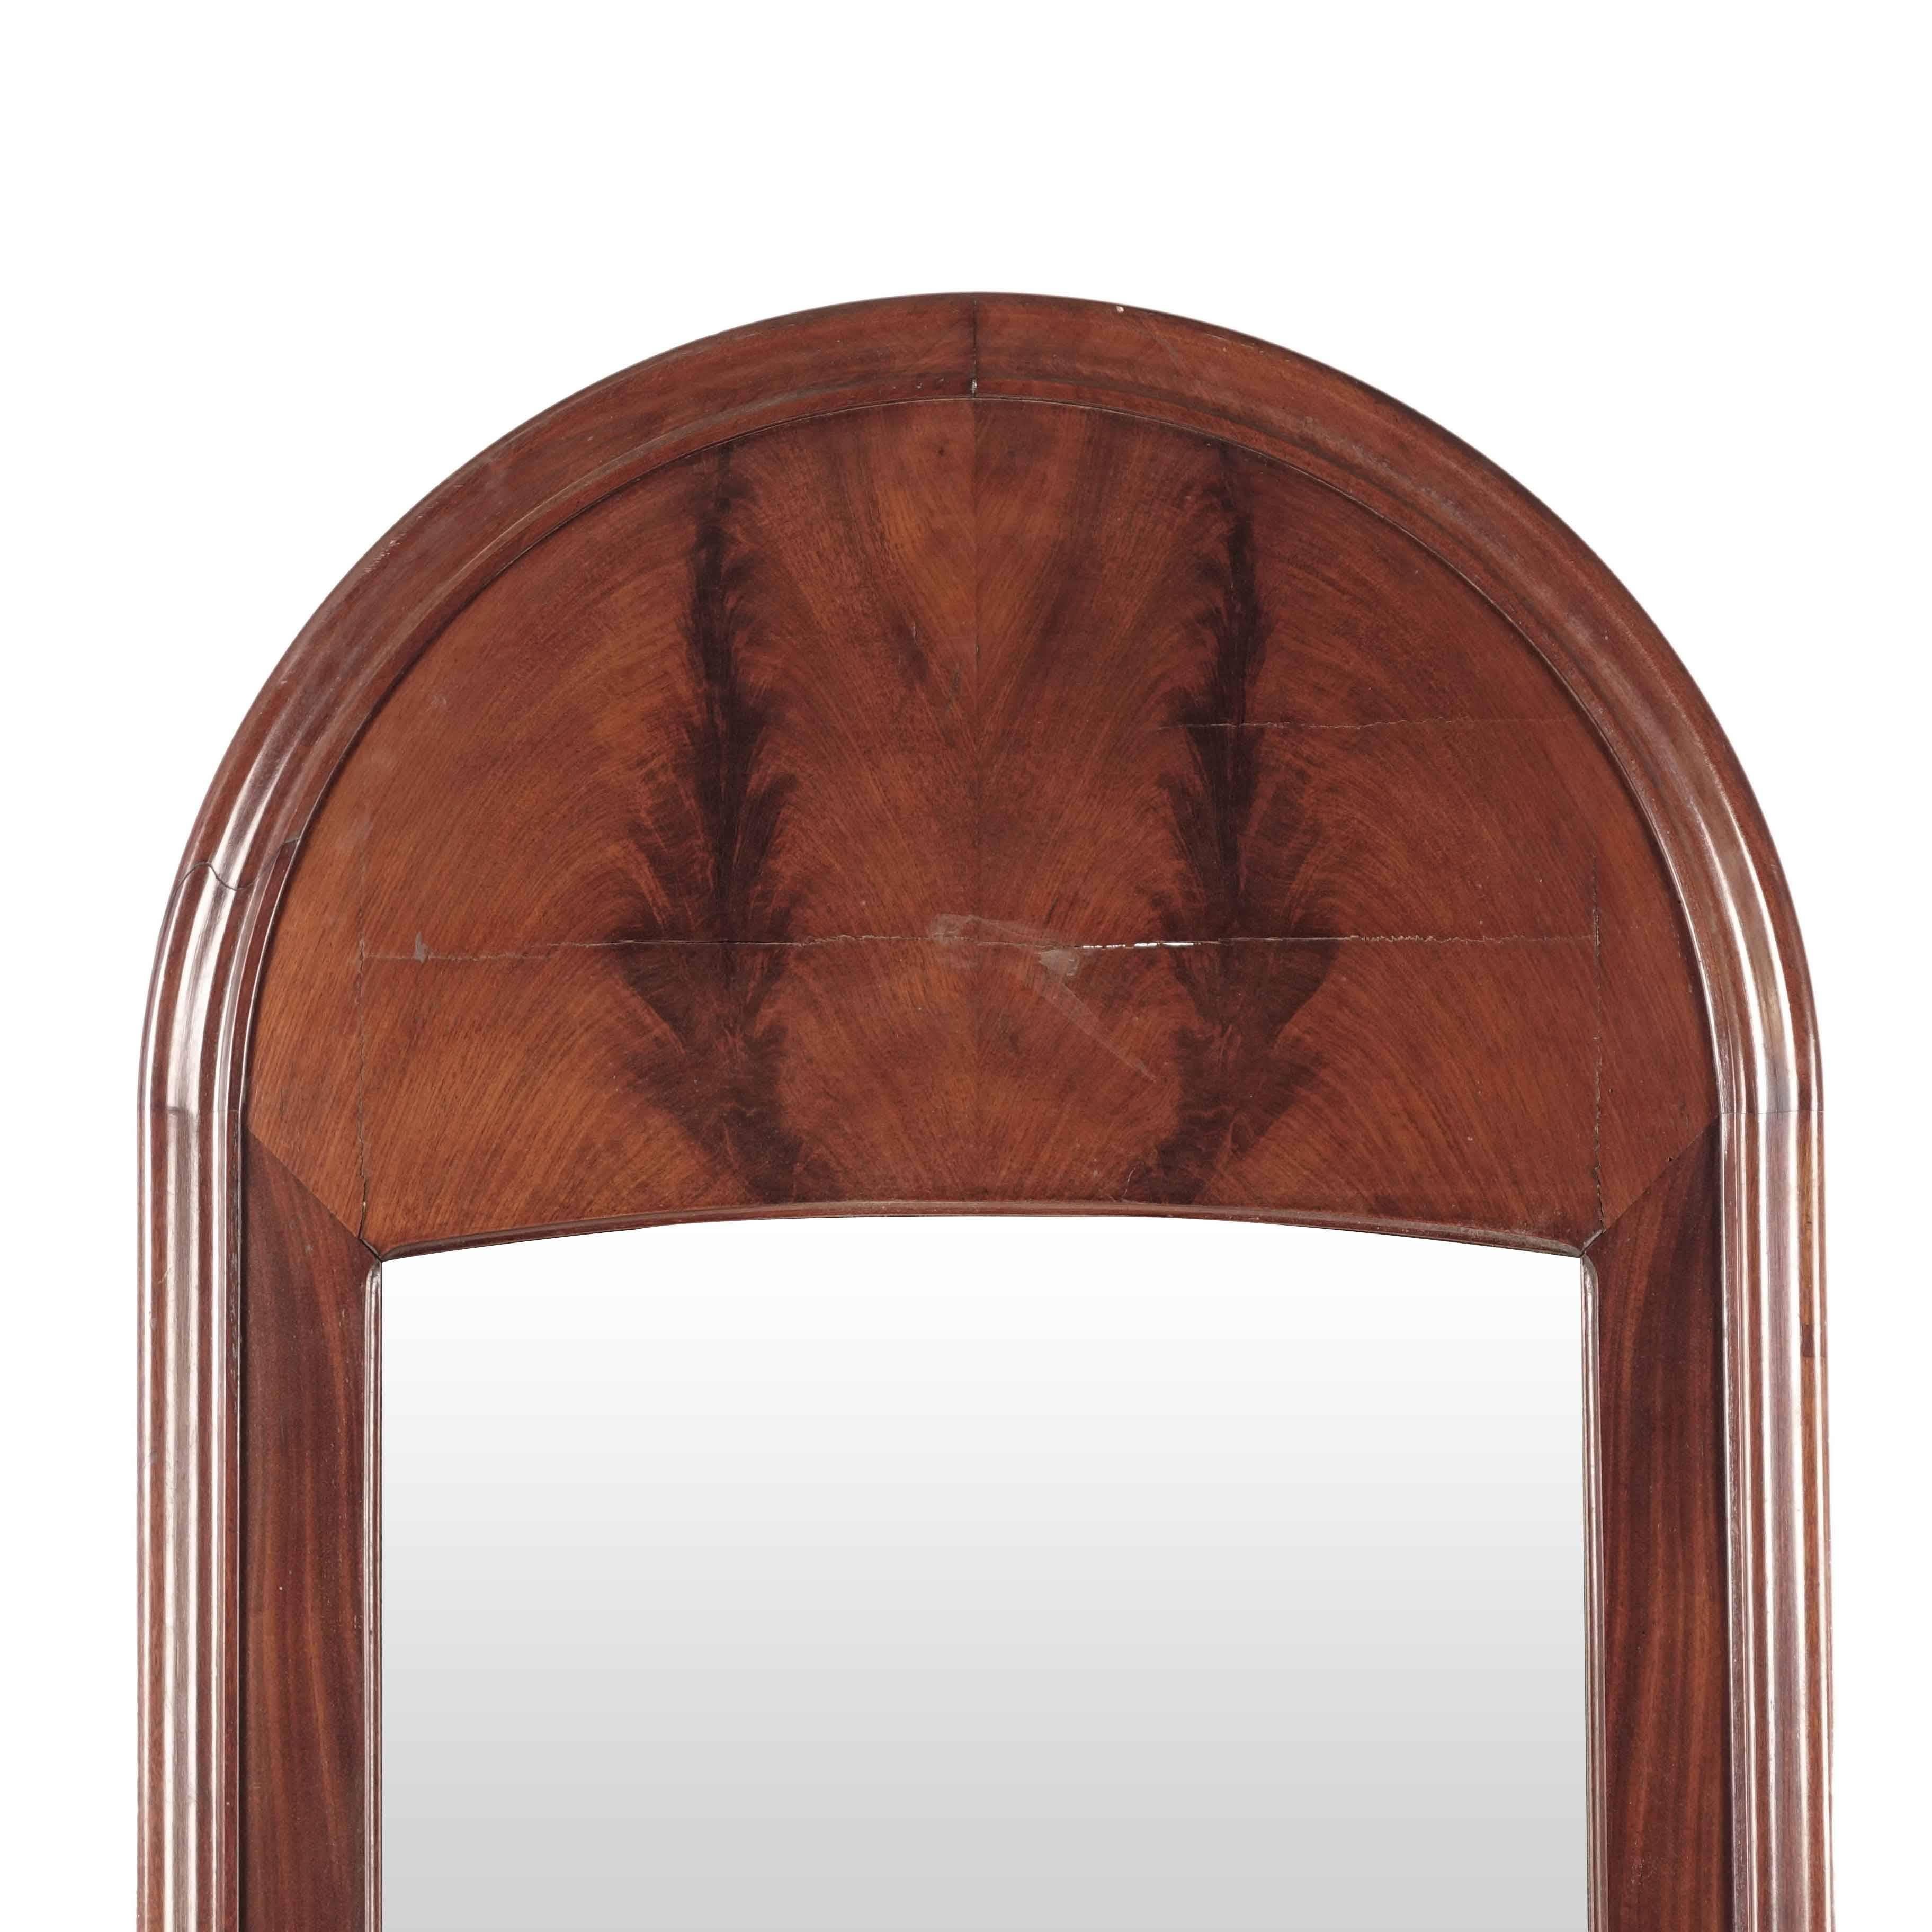 Stunning grand mirror from Sweden to add character to any space. A time typical Empire mirror in mahogany.